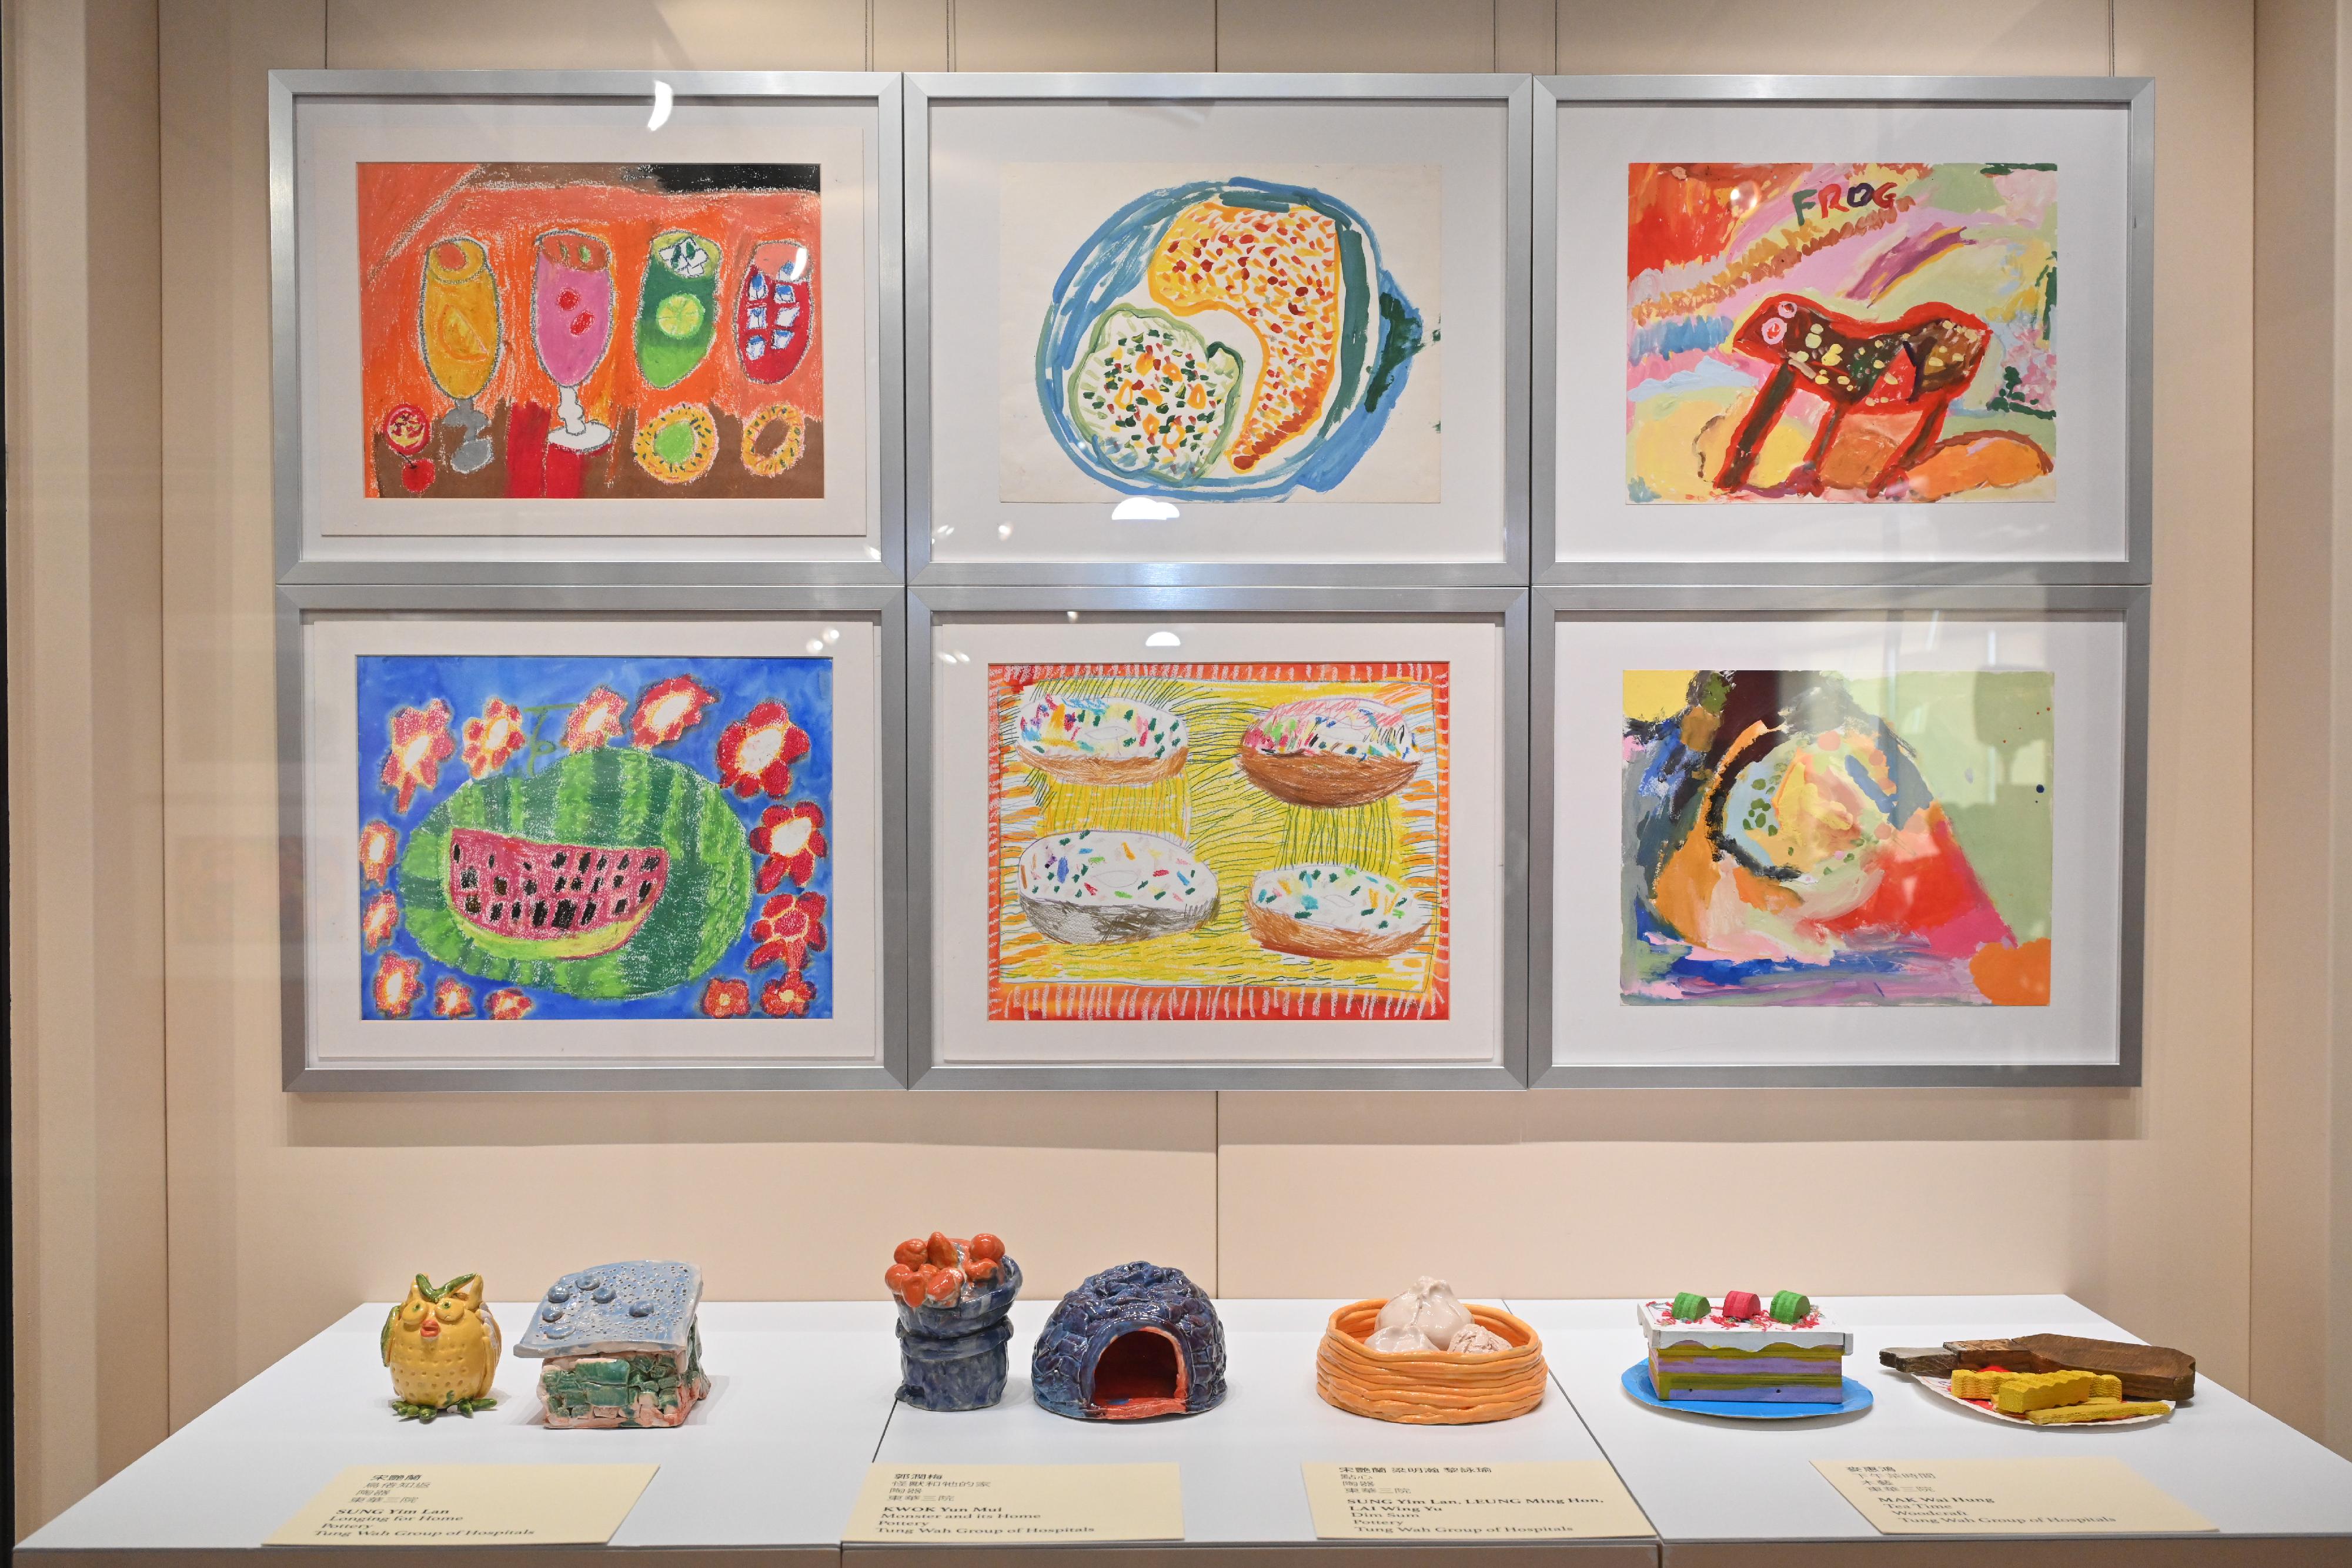 The "Infinite Creativity in Art" Exhibition, jointly organised by the Labour and Welfare Bureau, the Social Welfare Department, the Arts Development Fund for Persons with Disabilities and Sun Museum, will showcase about 200 art pieces created by persons with disabilities from tomorrow (January 12). Photo shows art pieces at the exhibition.